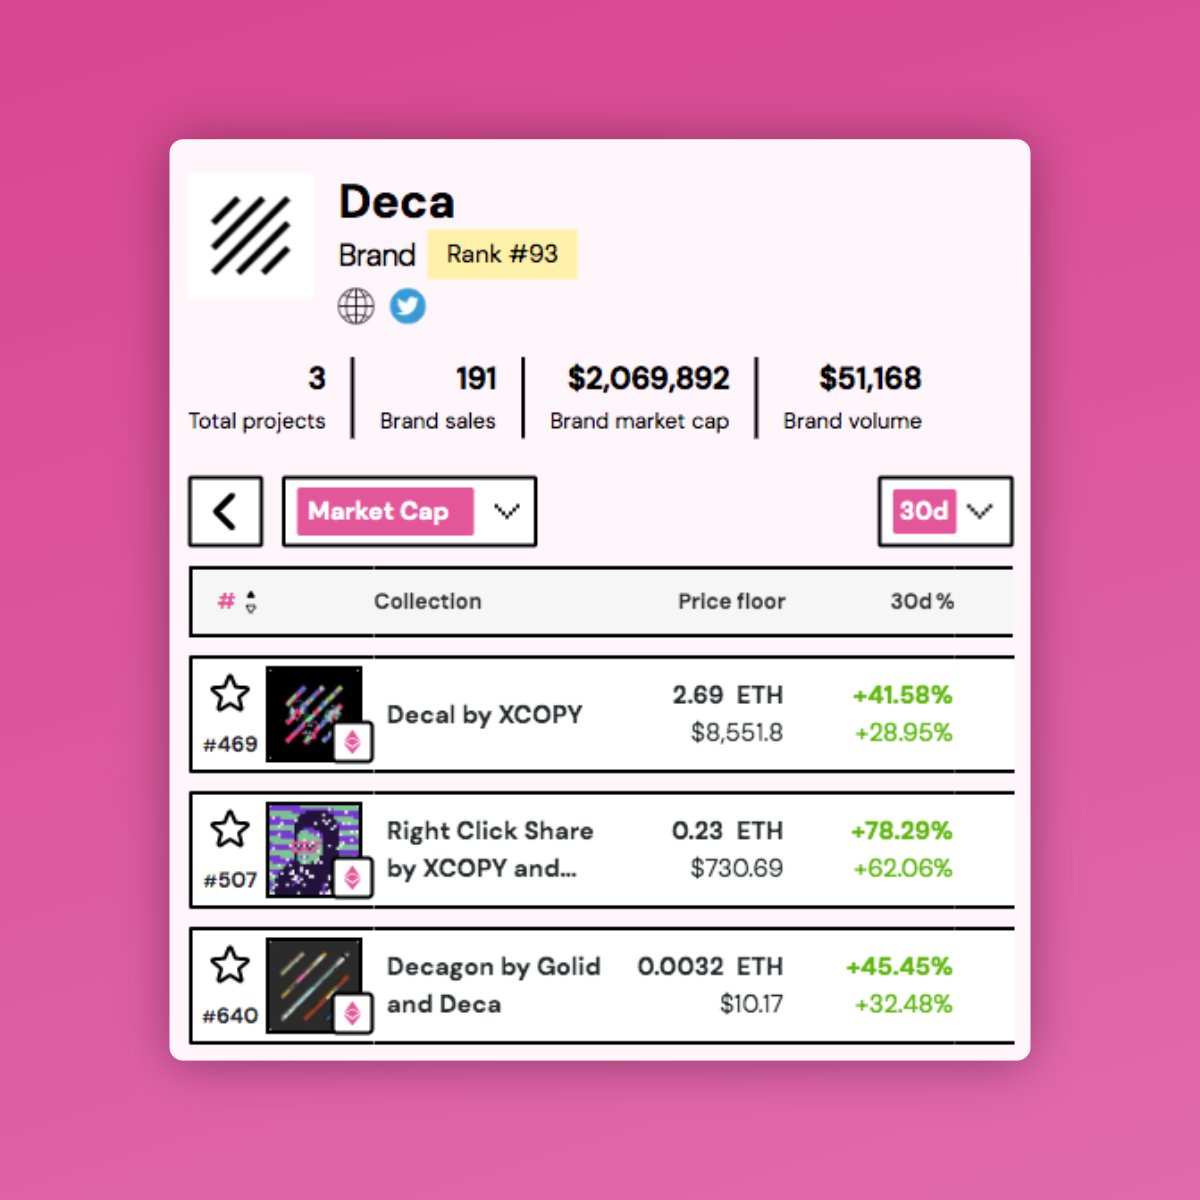 April saw @0xDecaArt shine! 💫 Floor prices surged across its collections, marking Deca as one of the standout brands this month. 🔝